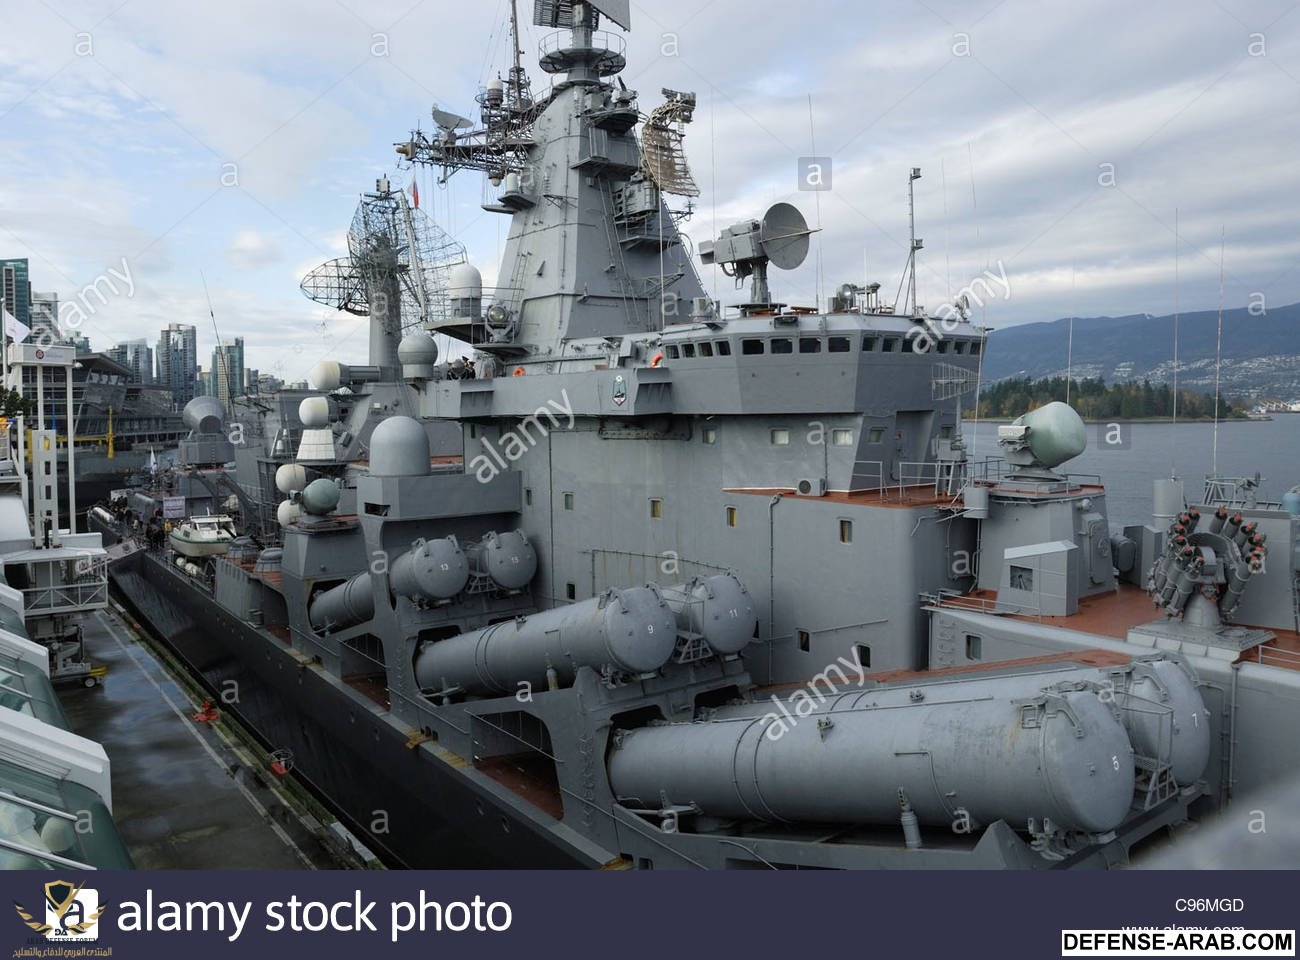 russian-missile-cruiser-varyag-berthed-at-canada-place-35-years-since-C96MGD.jpg